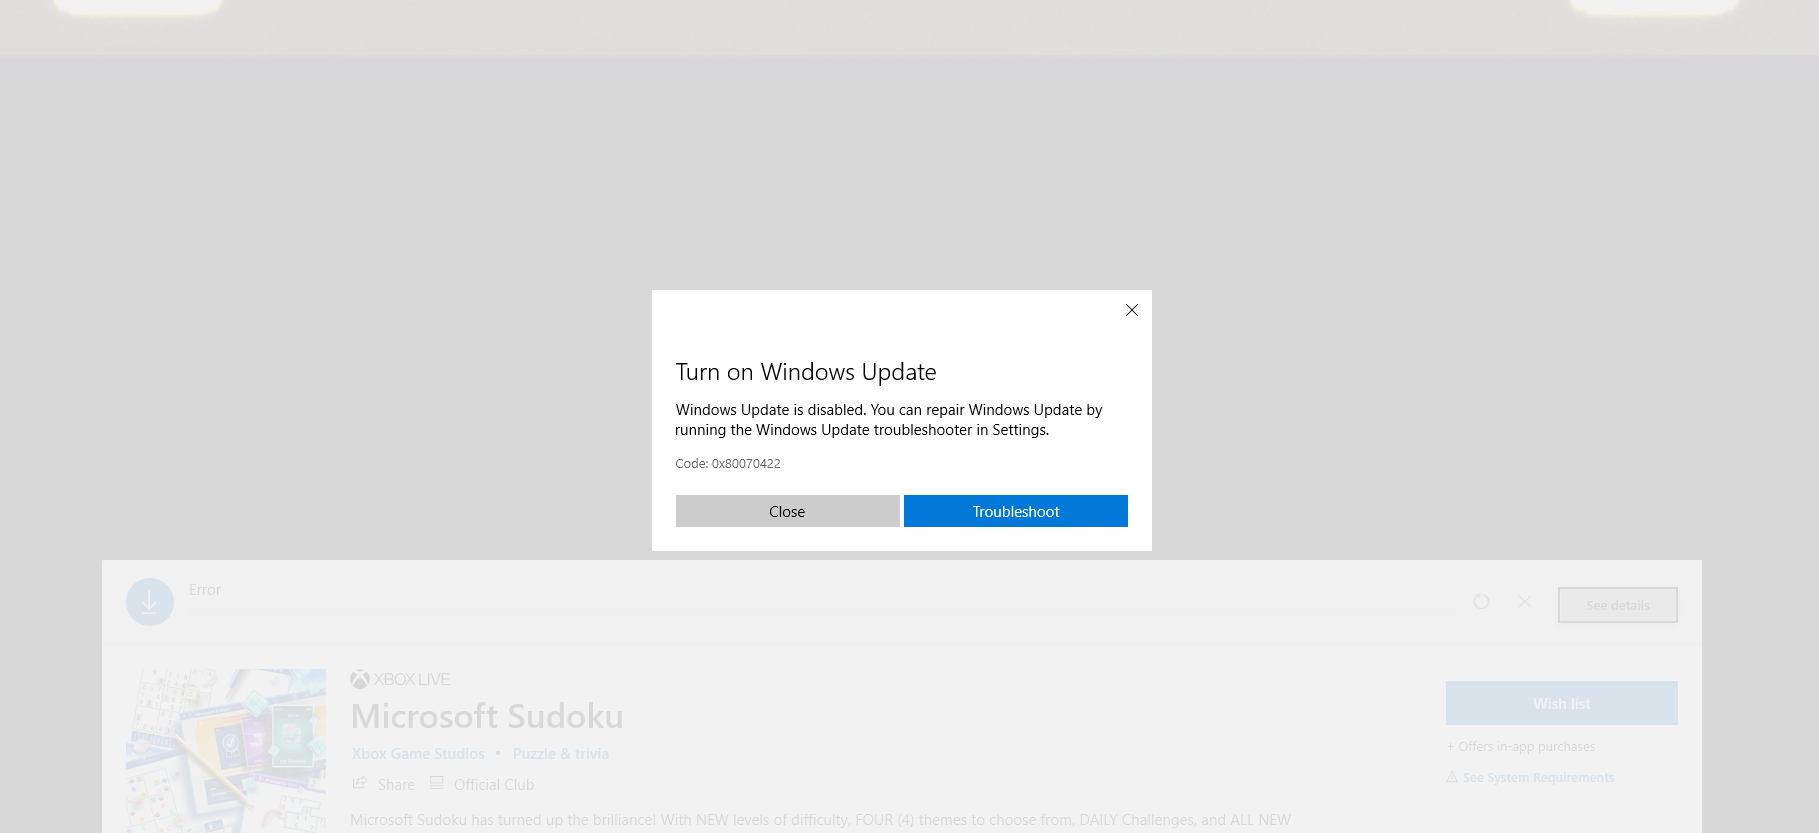 Windows Update page is blank 67aaf88d-04ab-44ee-b96a-e4c66ca8985f?upload=true.png